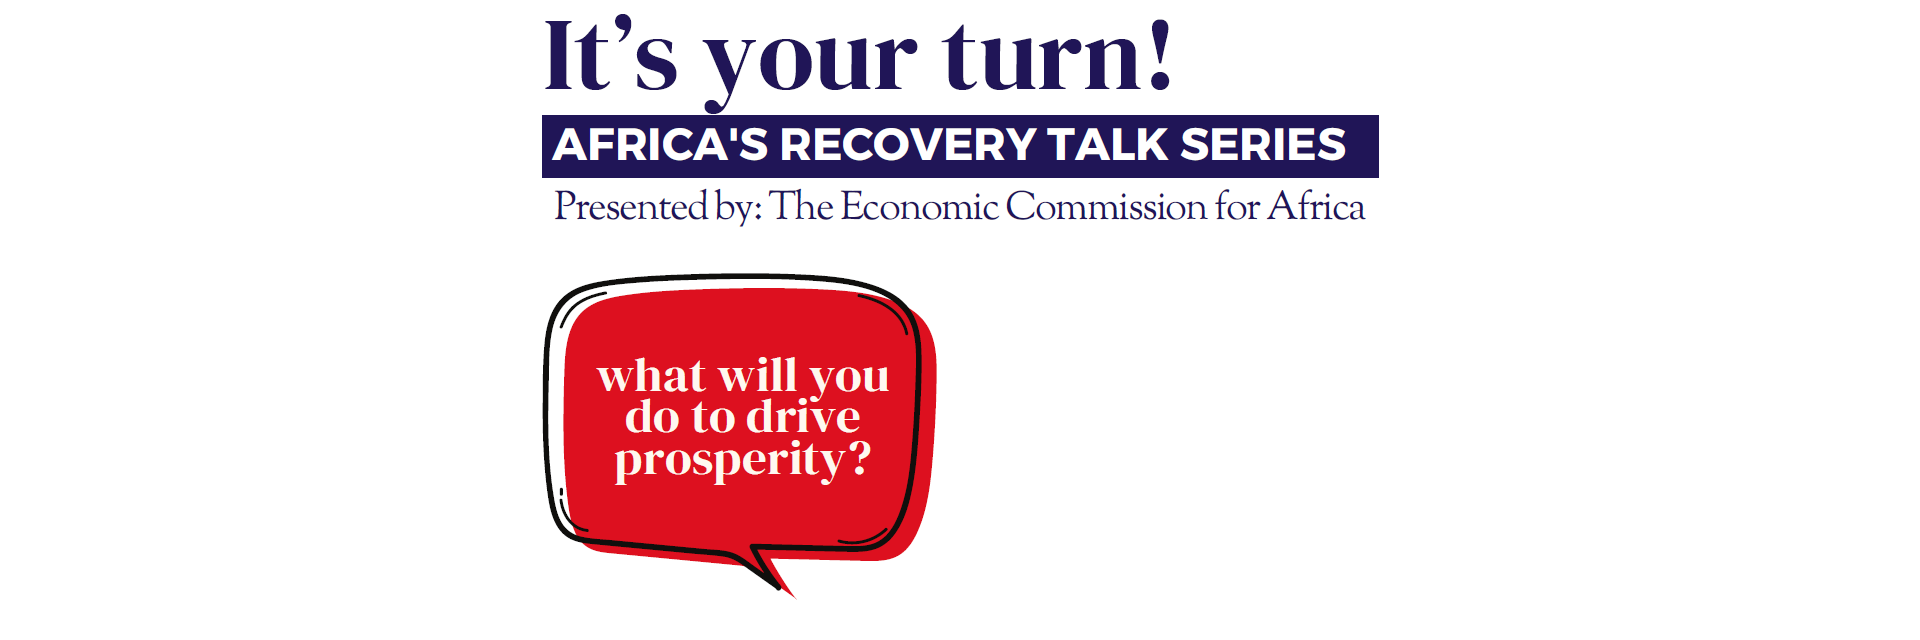 It’s your turn! AFRICA'S RECOVERY TALK SERIES